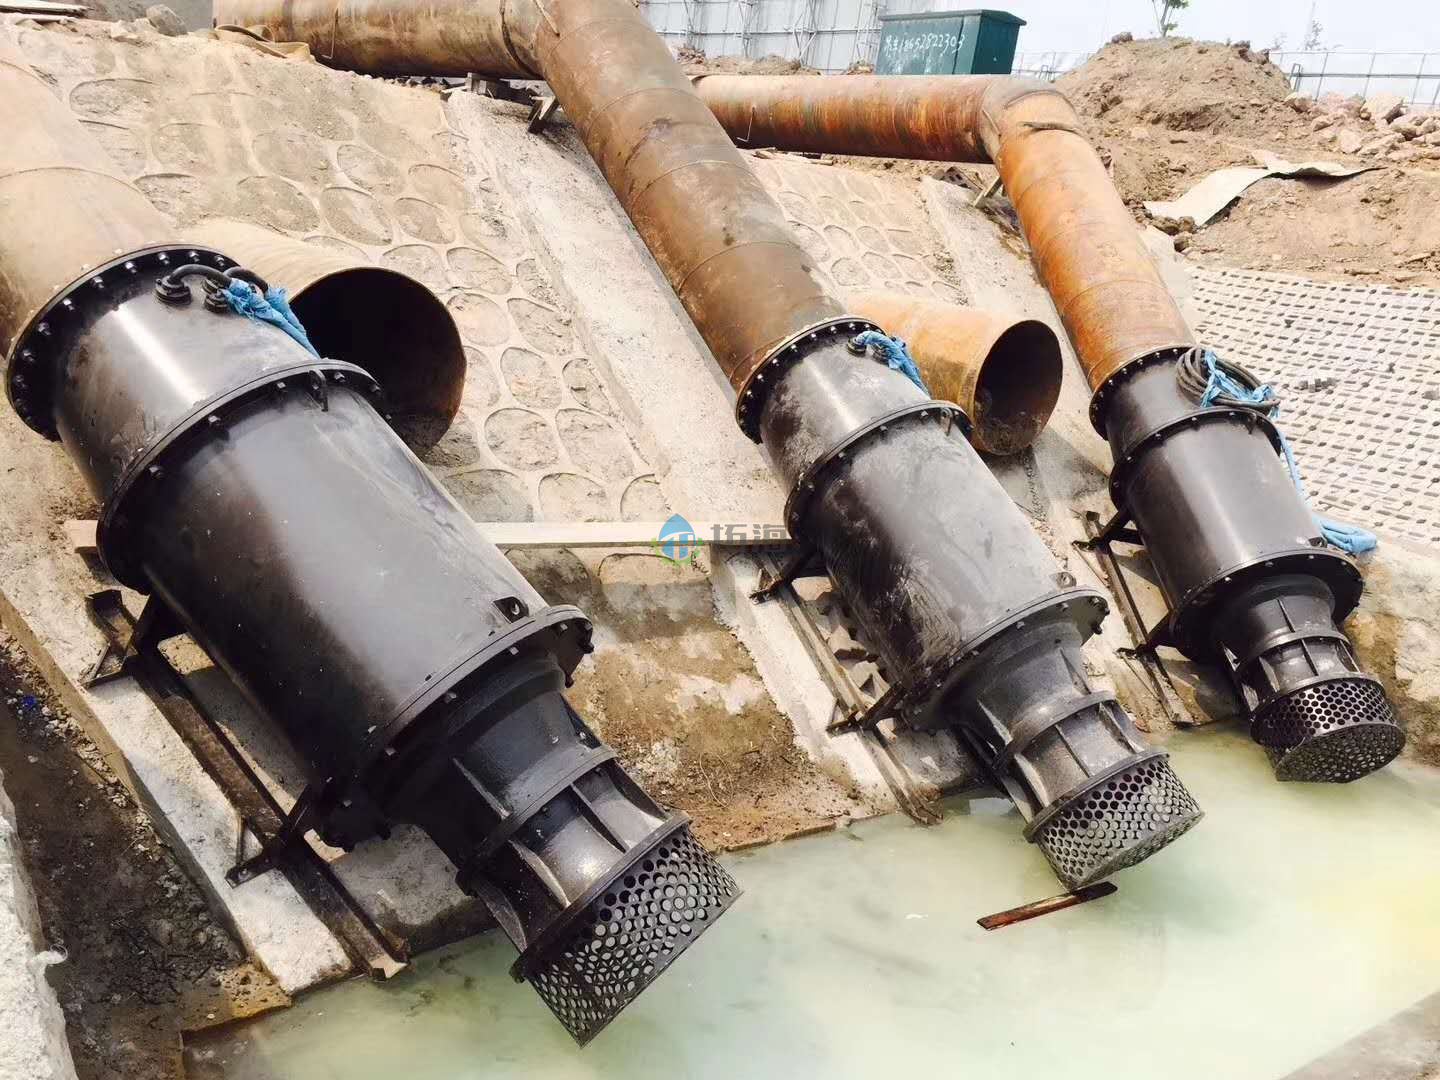 Sled Type Submersible Axial Flow Pump